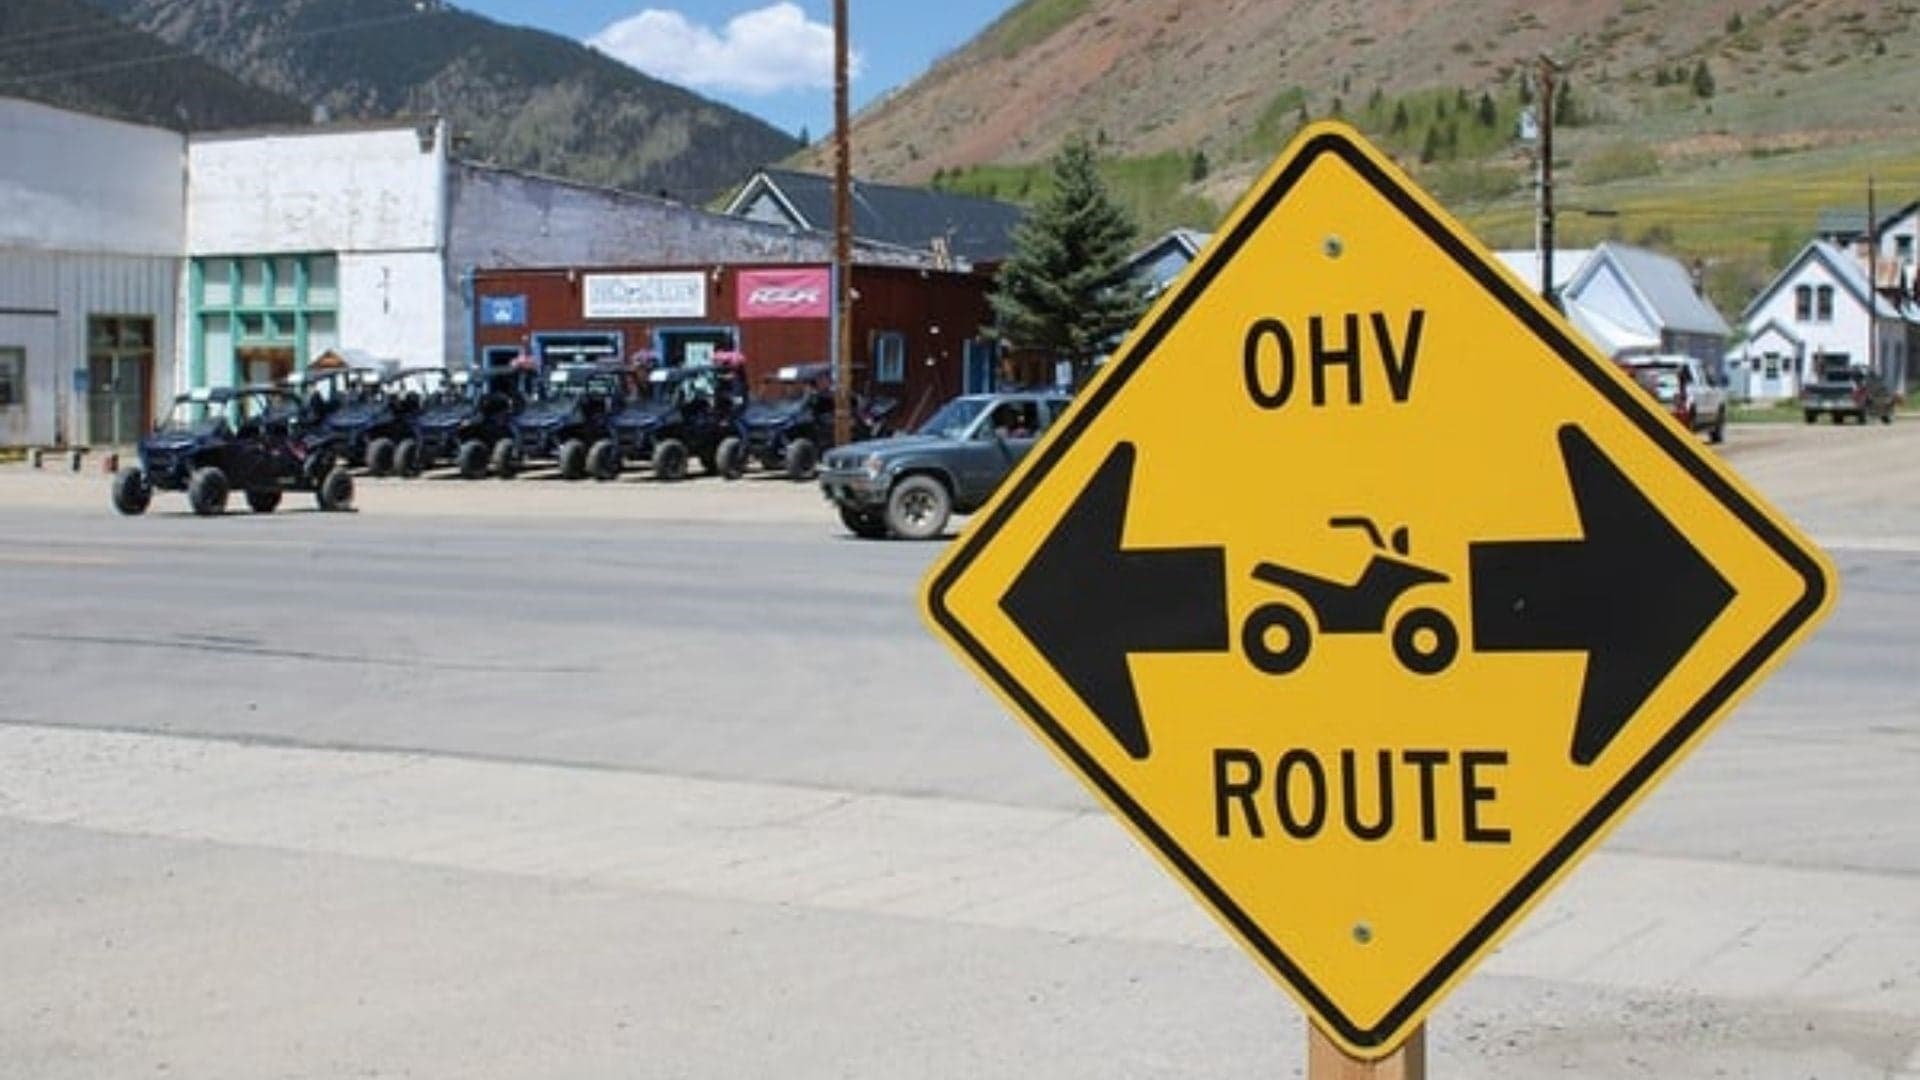 Off-Road Advocacy Groups and Residents In Colorado Towns Spar Over OHVs